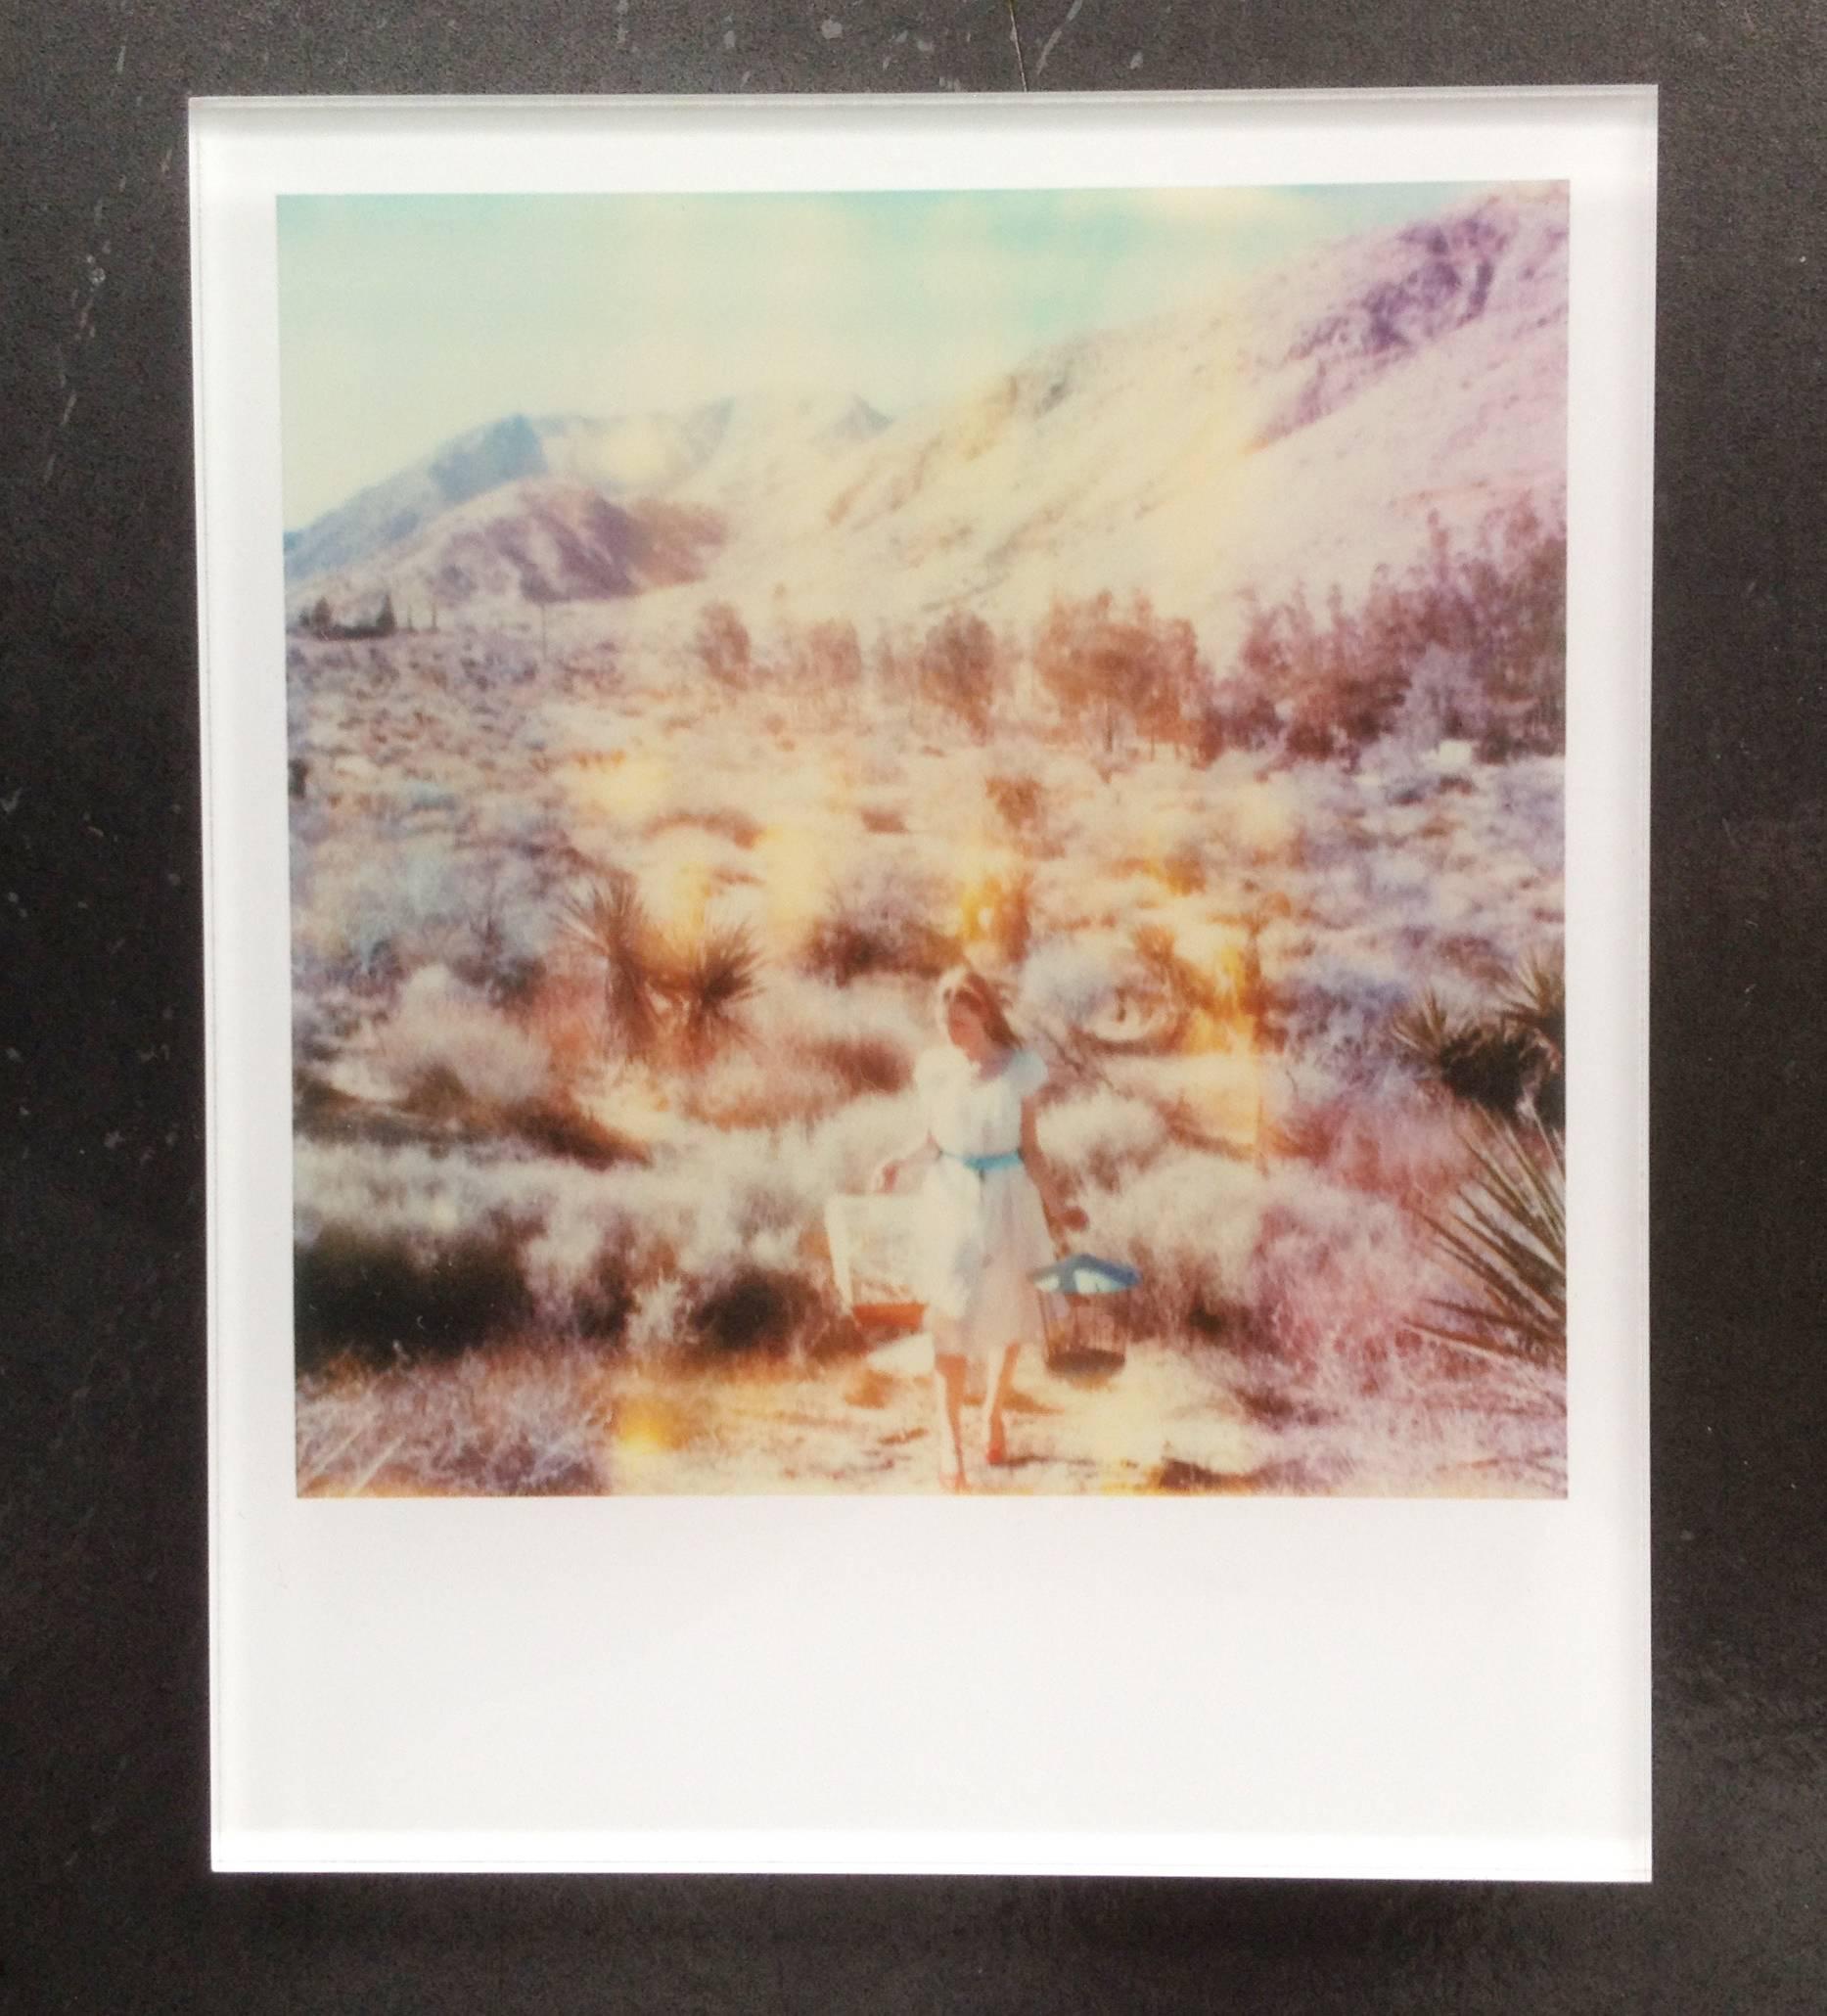 Stefanie Schneider's Minis
'Runaway' (Haley and the Birds) - 2013

signed and signature brand on verso
Lambda digital Color Photographs based on a Polaroid

Polaroid sized open Editions 1999-2013
10.7 x 8.8cm (Image 7.9x7.7cm)
mounted: sandwiched in